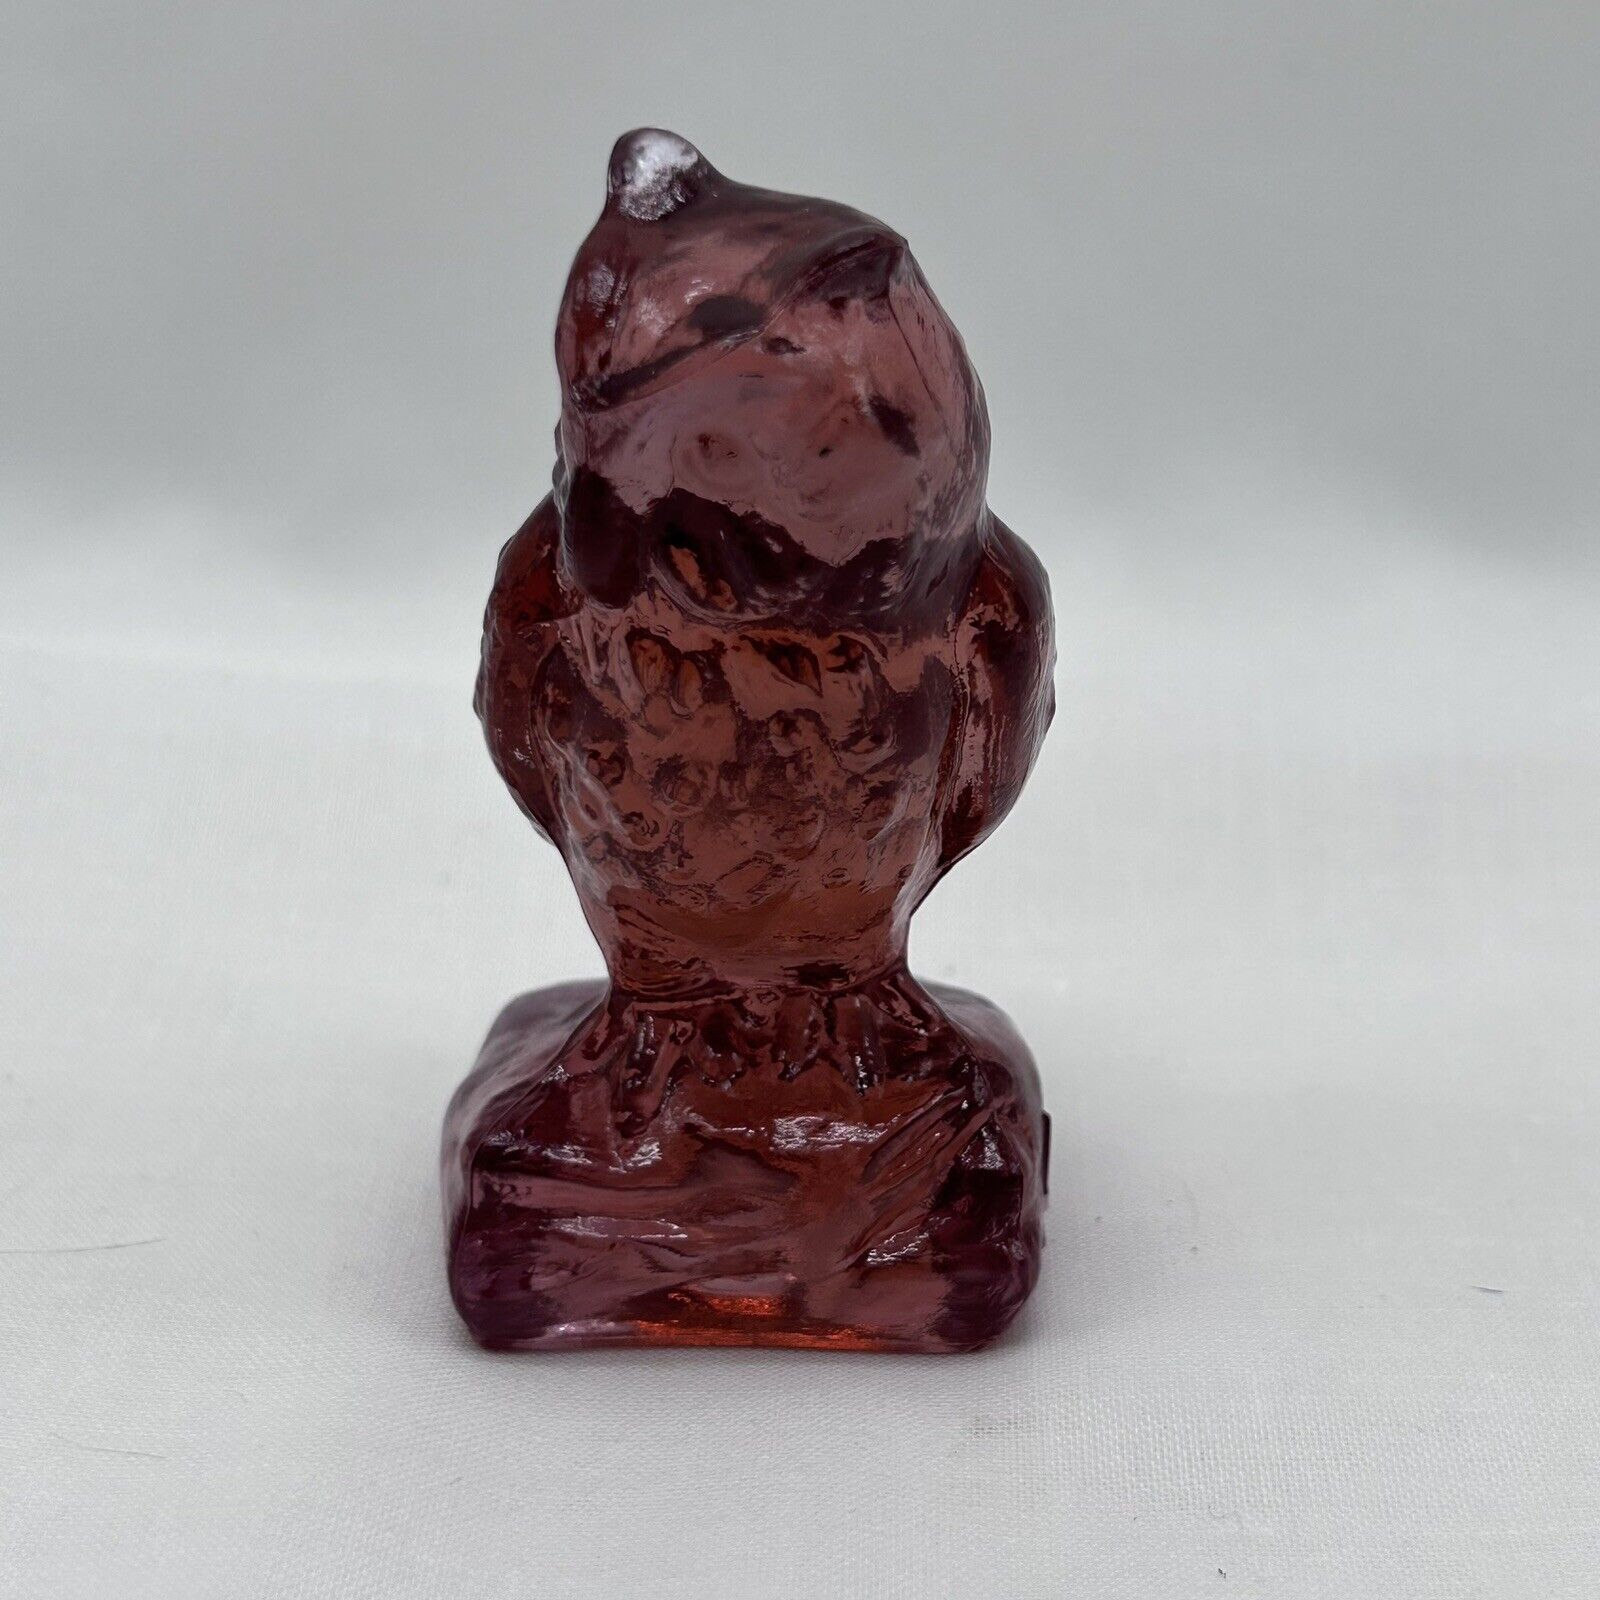 BOYD ART GLASS OWL Figurine Paperweight (2nd 5 Years) Rosewood?  1984-1988 VTG